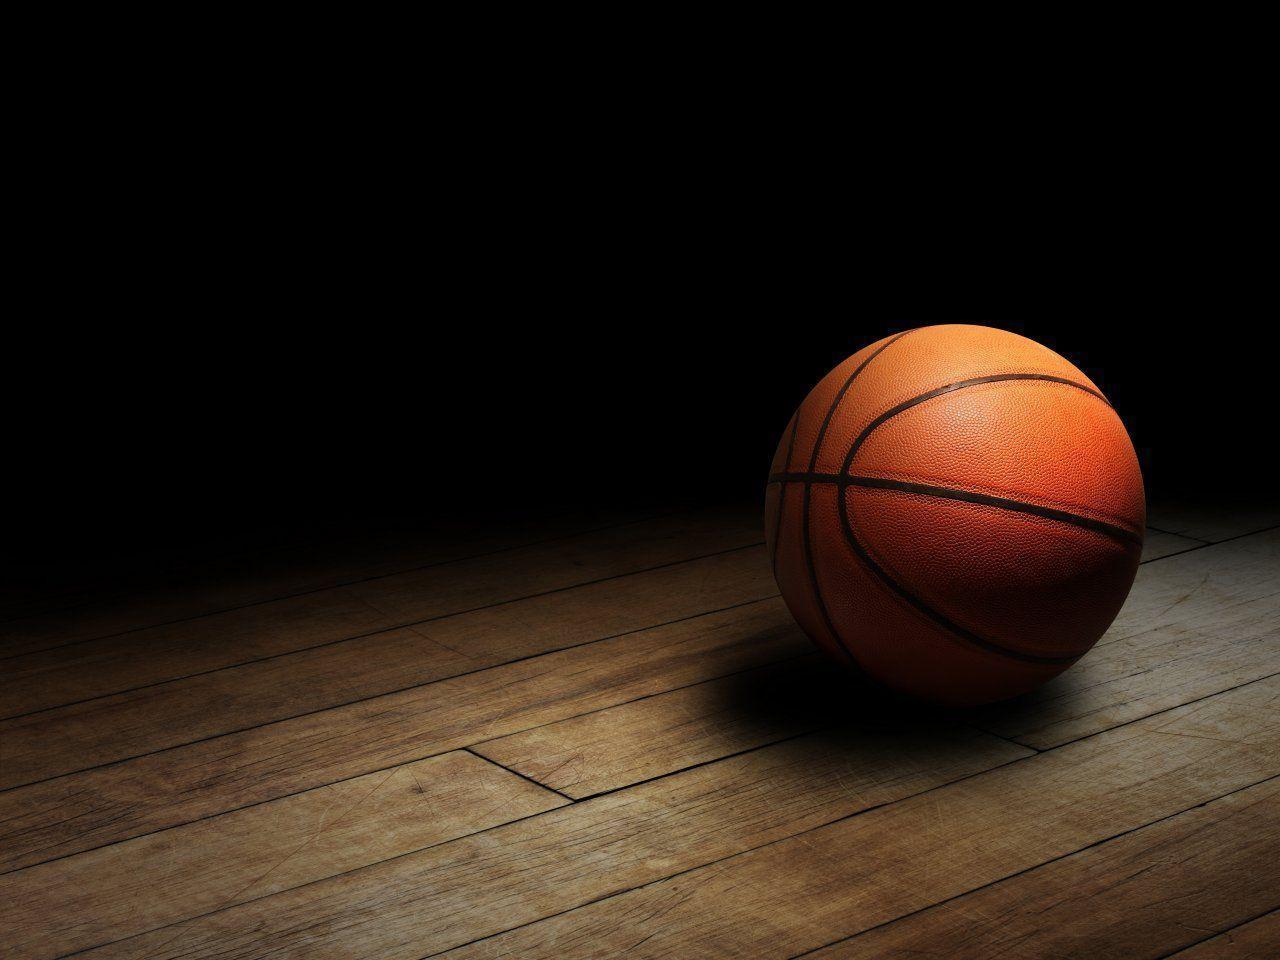 Awesome Basketball Backgrounds Wallpaper Cave HD Wallpapers Download Free Images Wallpaper [wallpaper981.blogspot.com]